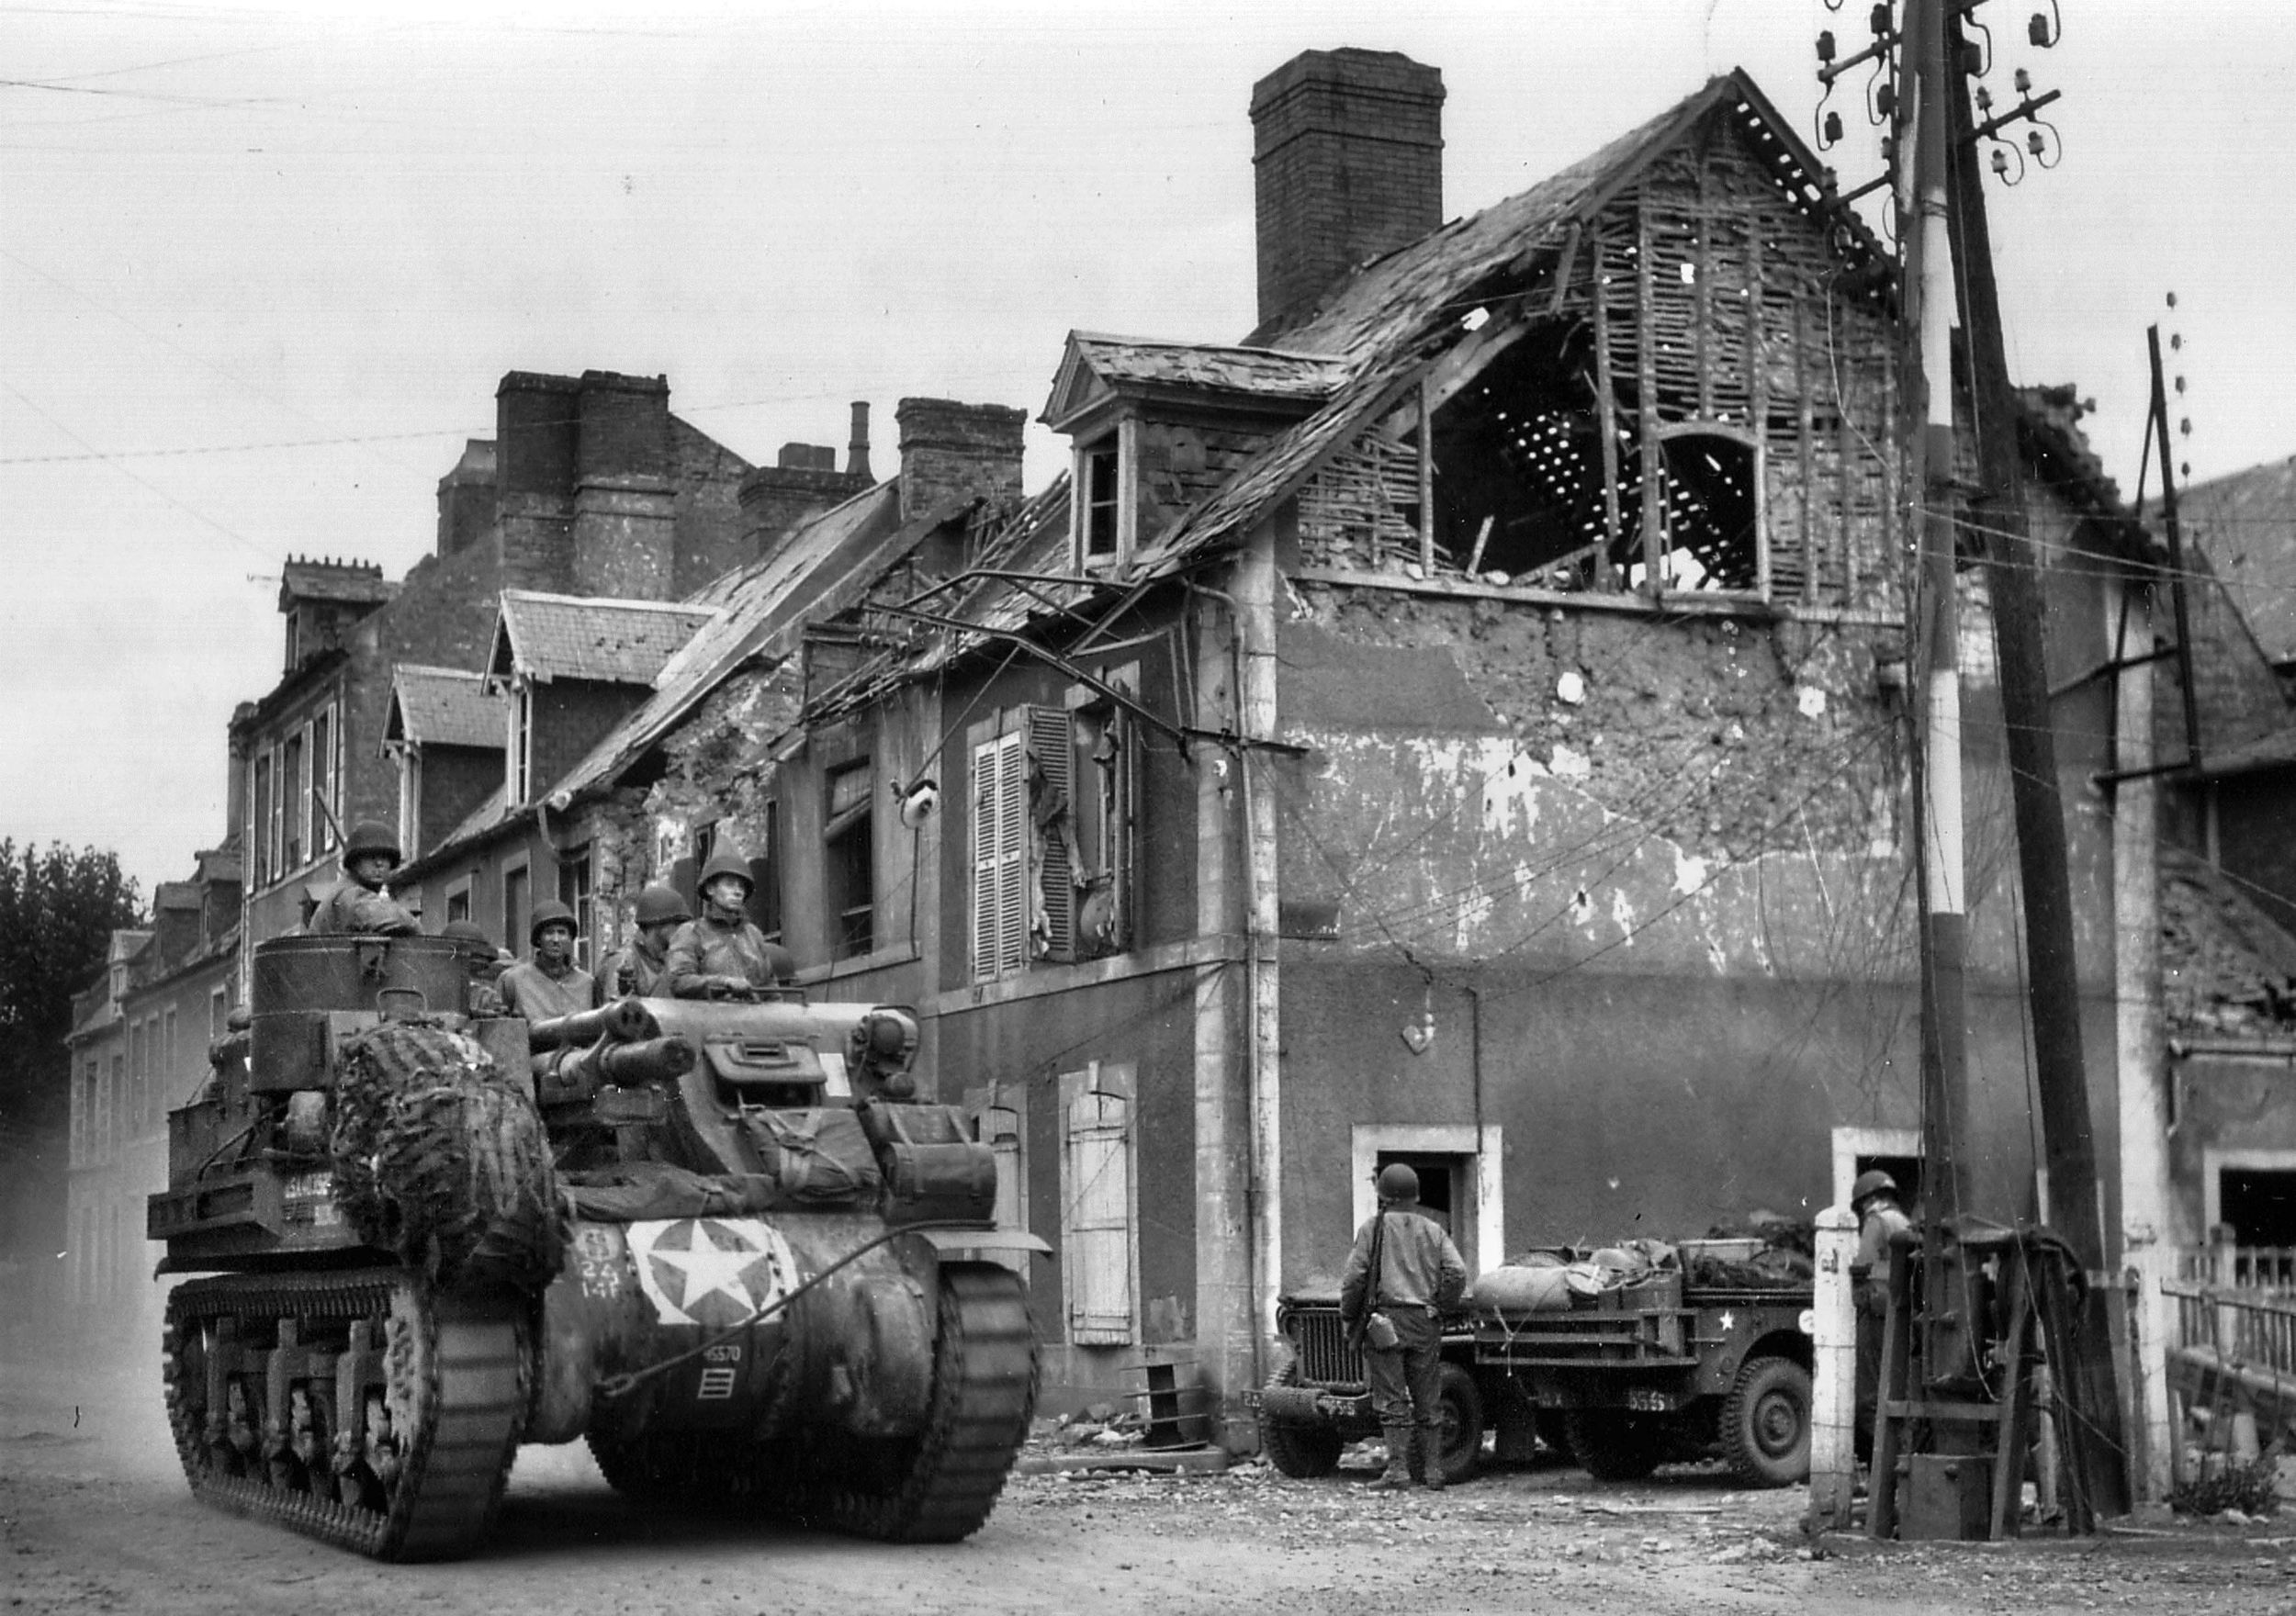 An American self-propelled gun rolls through a street in the French city of Carentan. As of June 11, 1944, General Hodges was monitoring the progress of the American effort to eject the Germans from the important road junction there. 